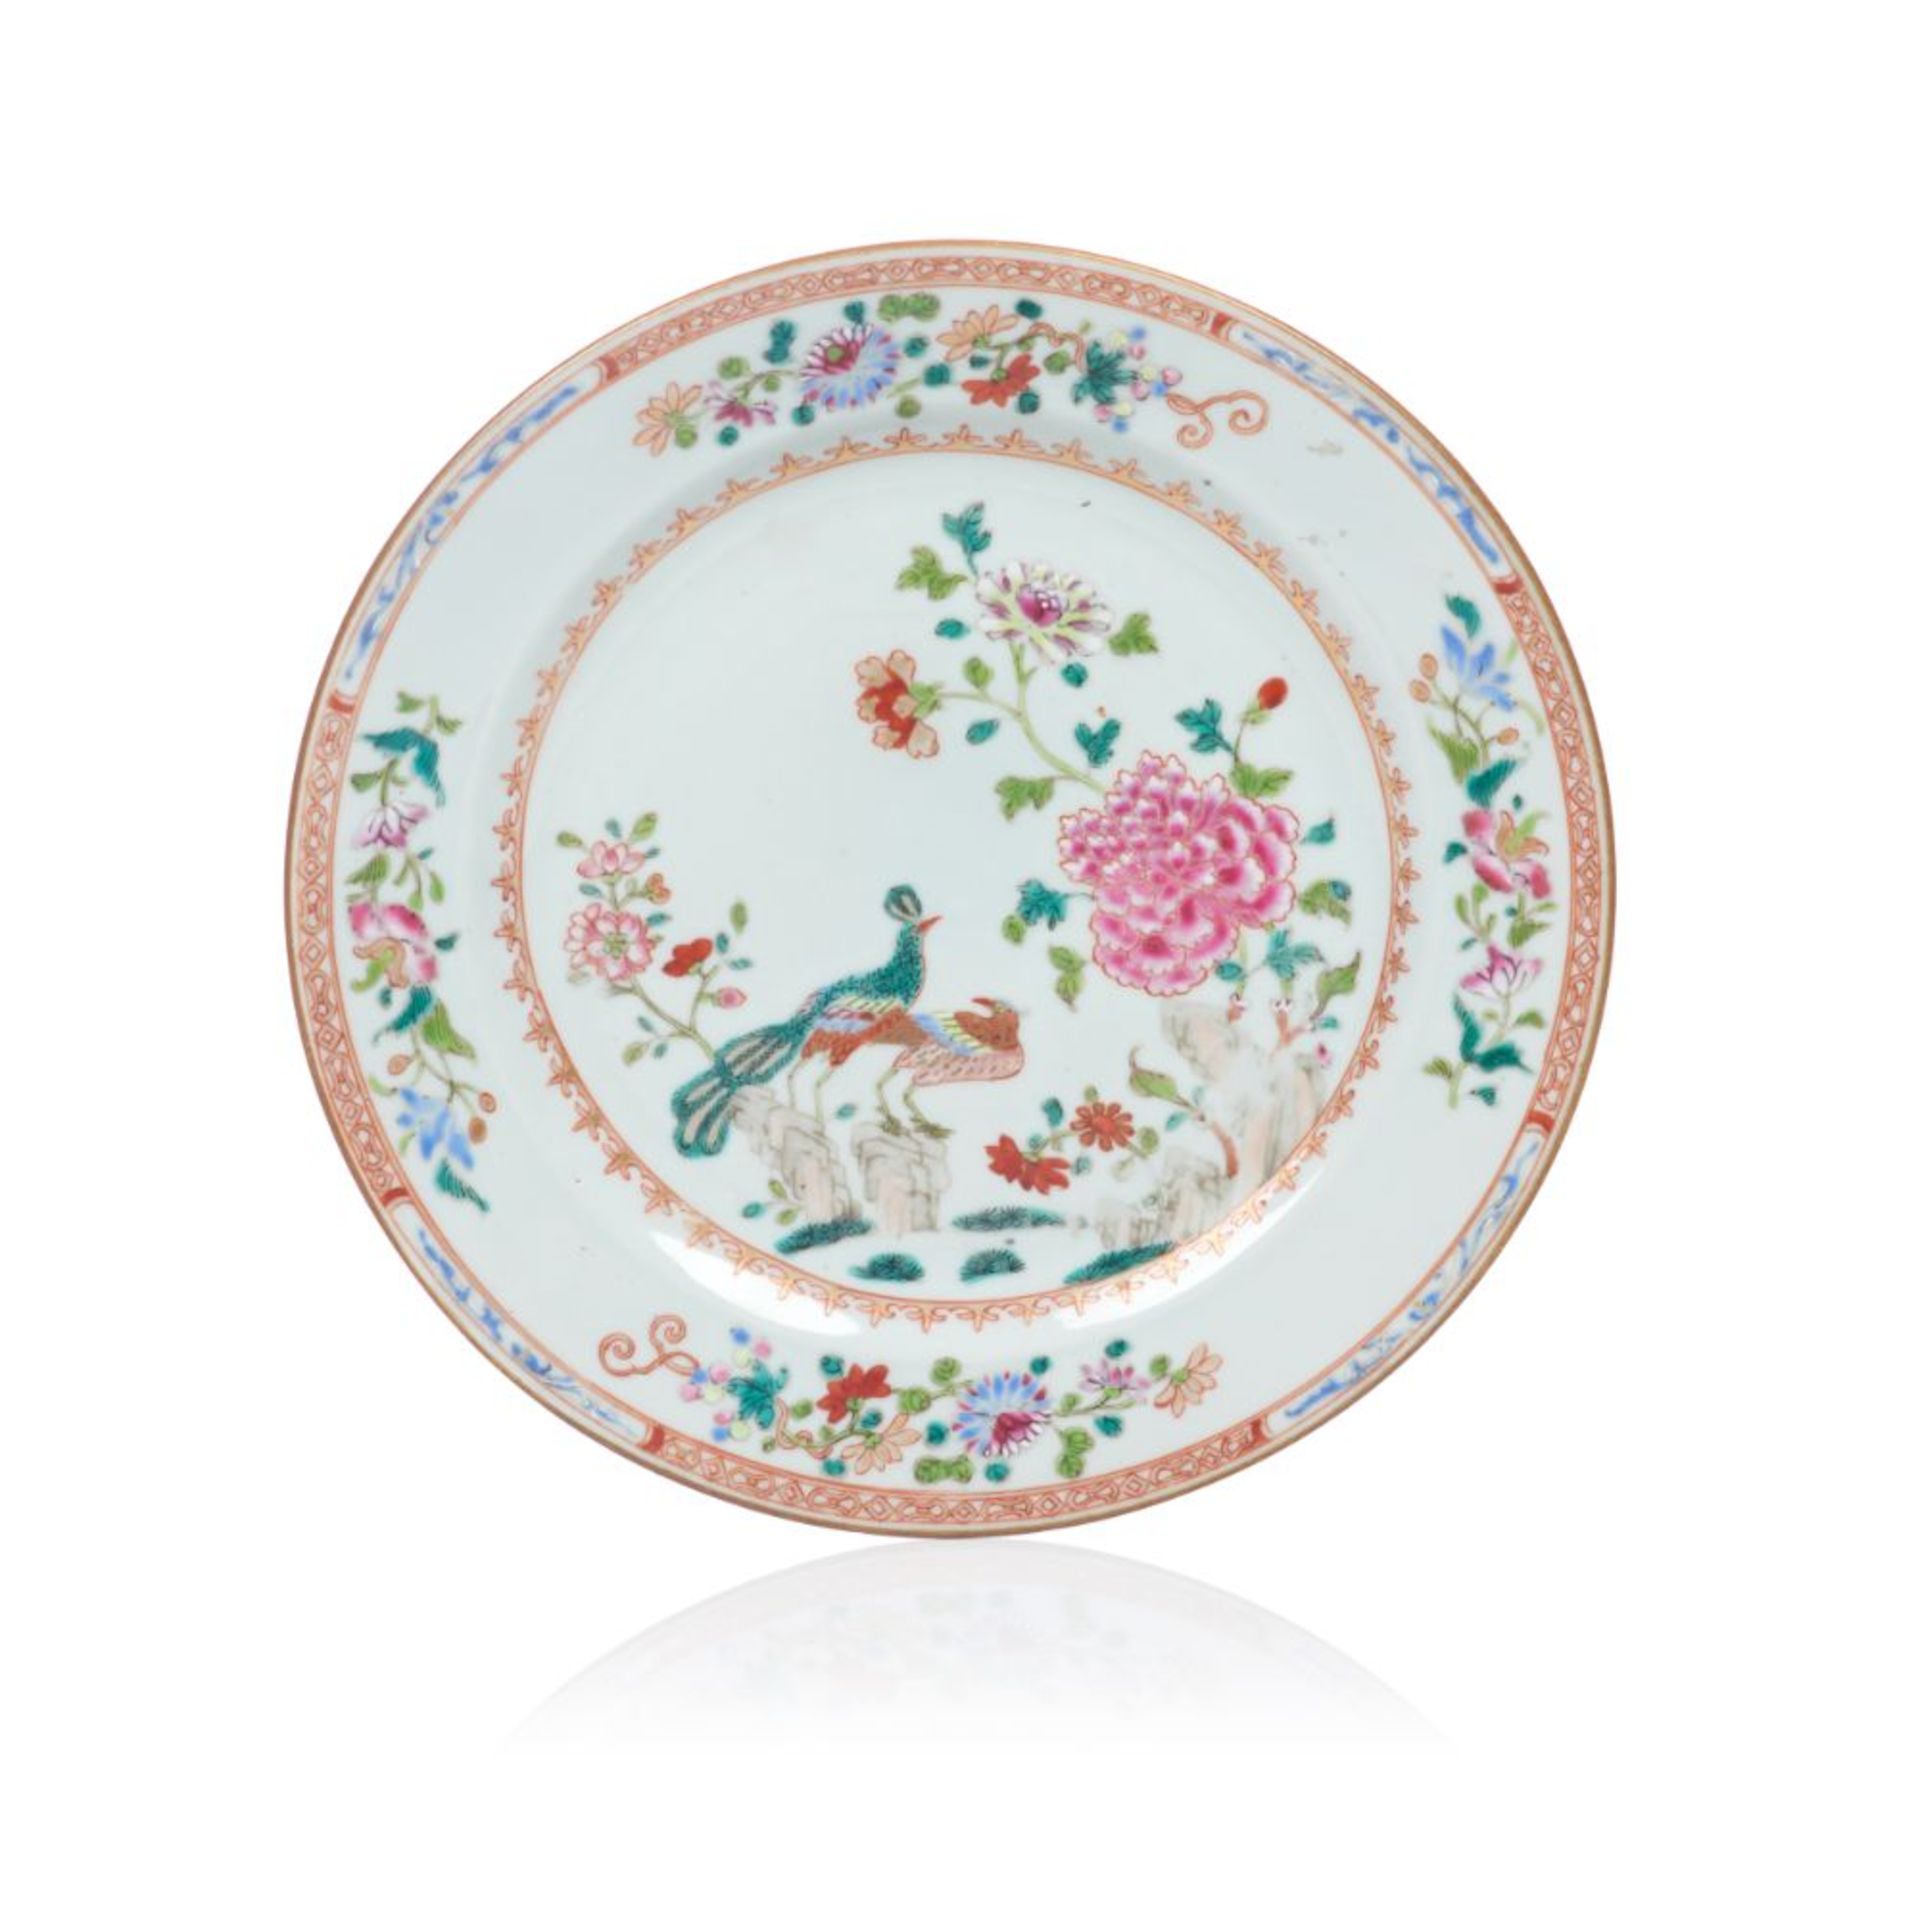 A plate, Chinese export porcelain, Polychrome "Famille Rose" enamelled decoration of central